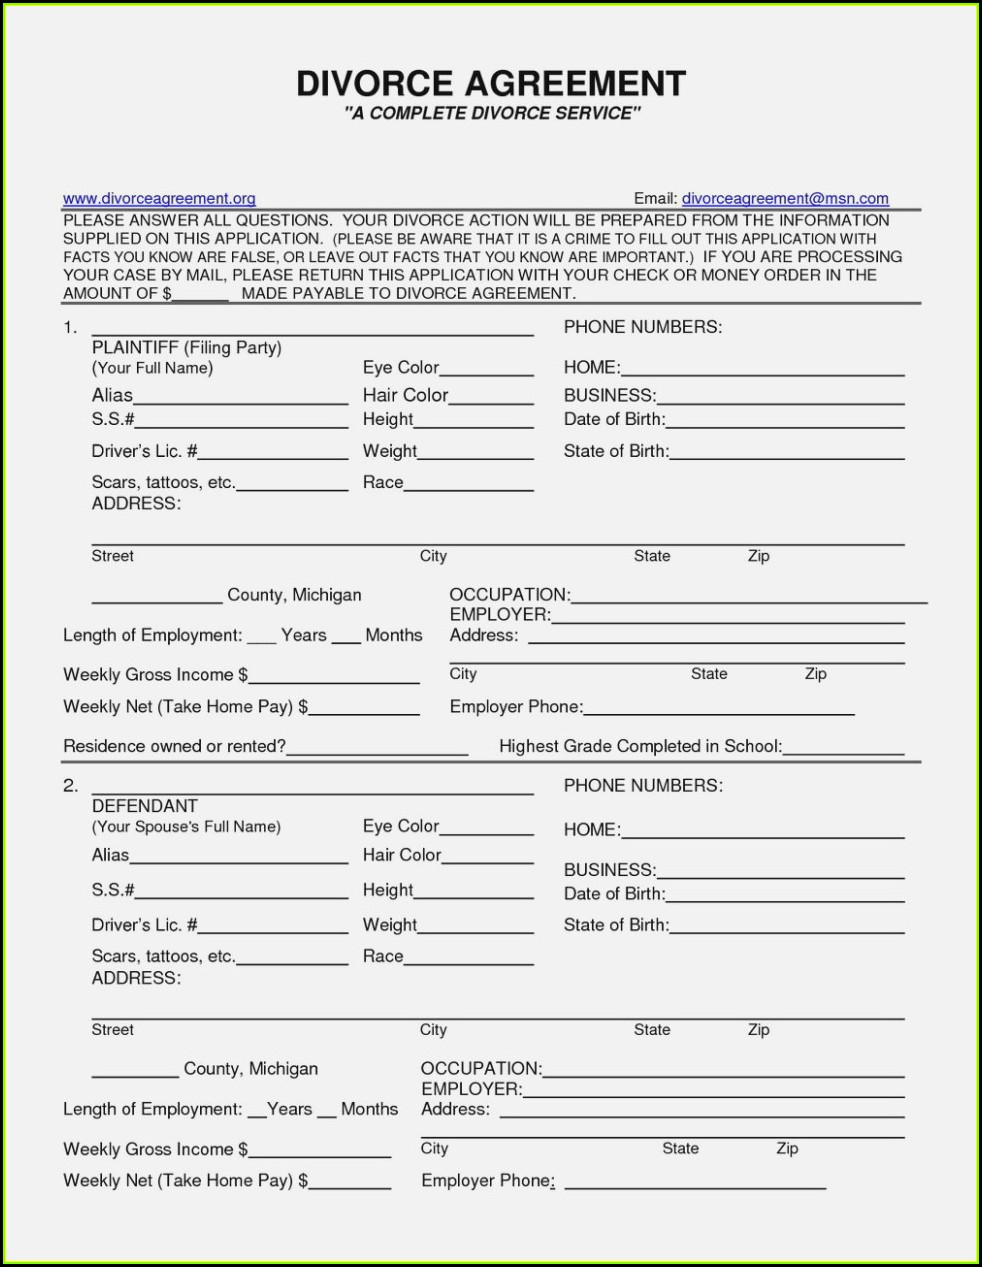 Wi Divorce Forms Free Form Resume Examples xM8plWa8Y9